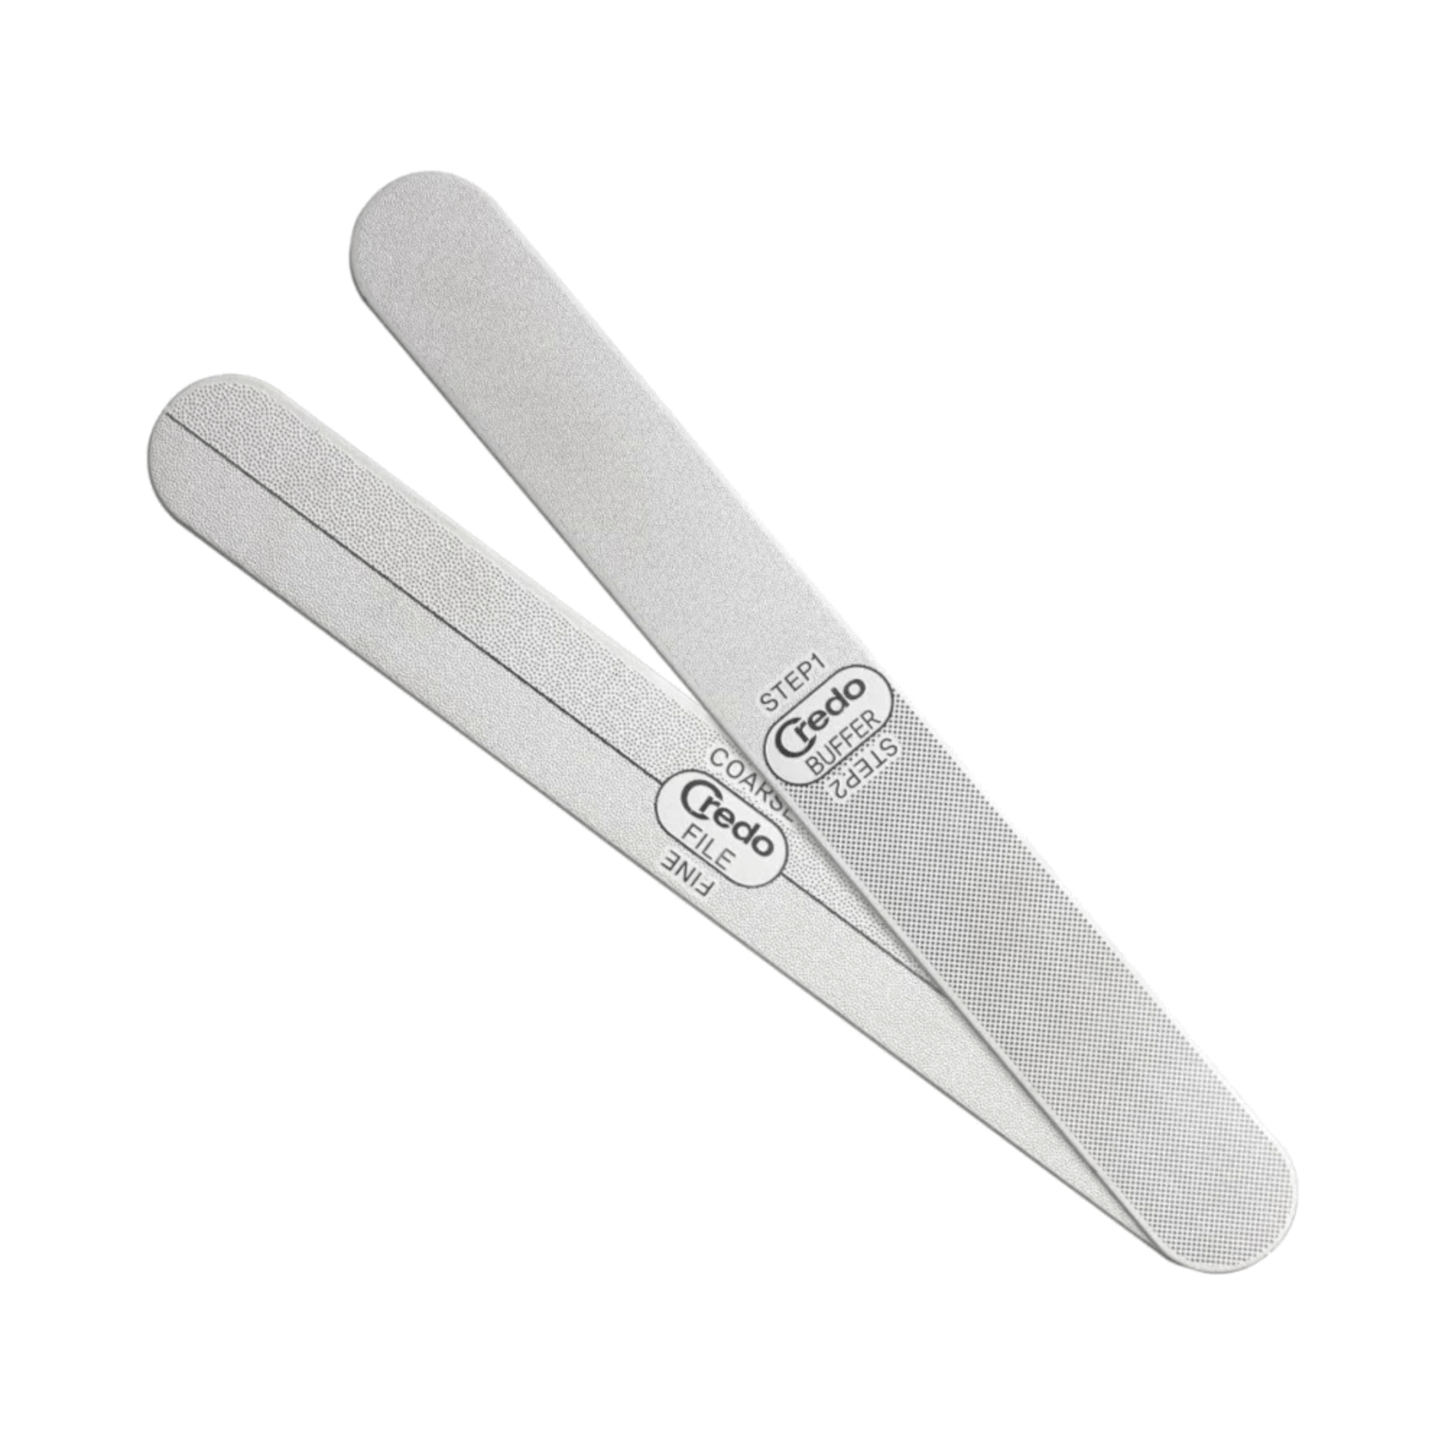 Primary Image of Stainless Steel 2-in-1 Metal Nailfile and Buffer